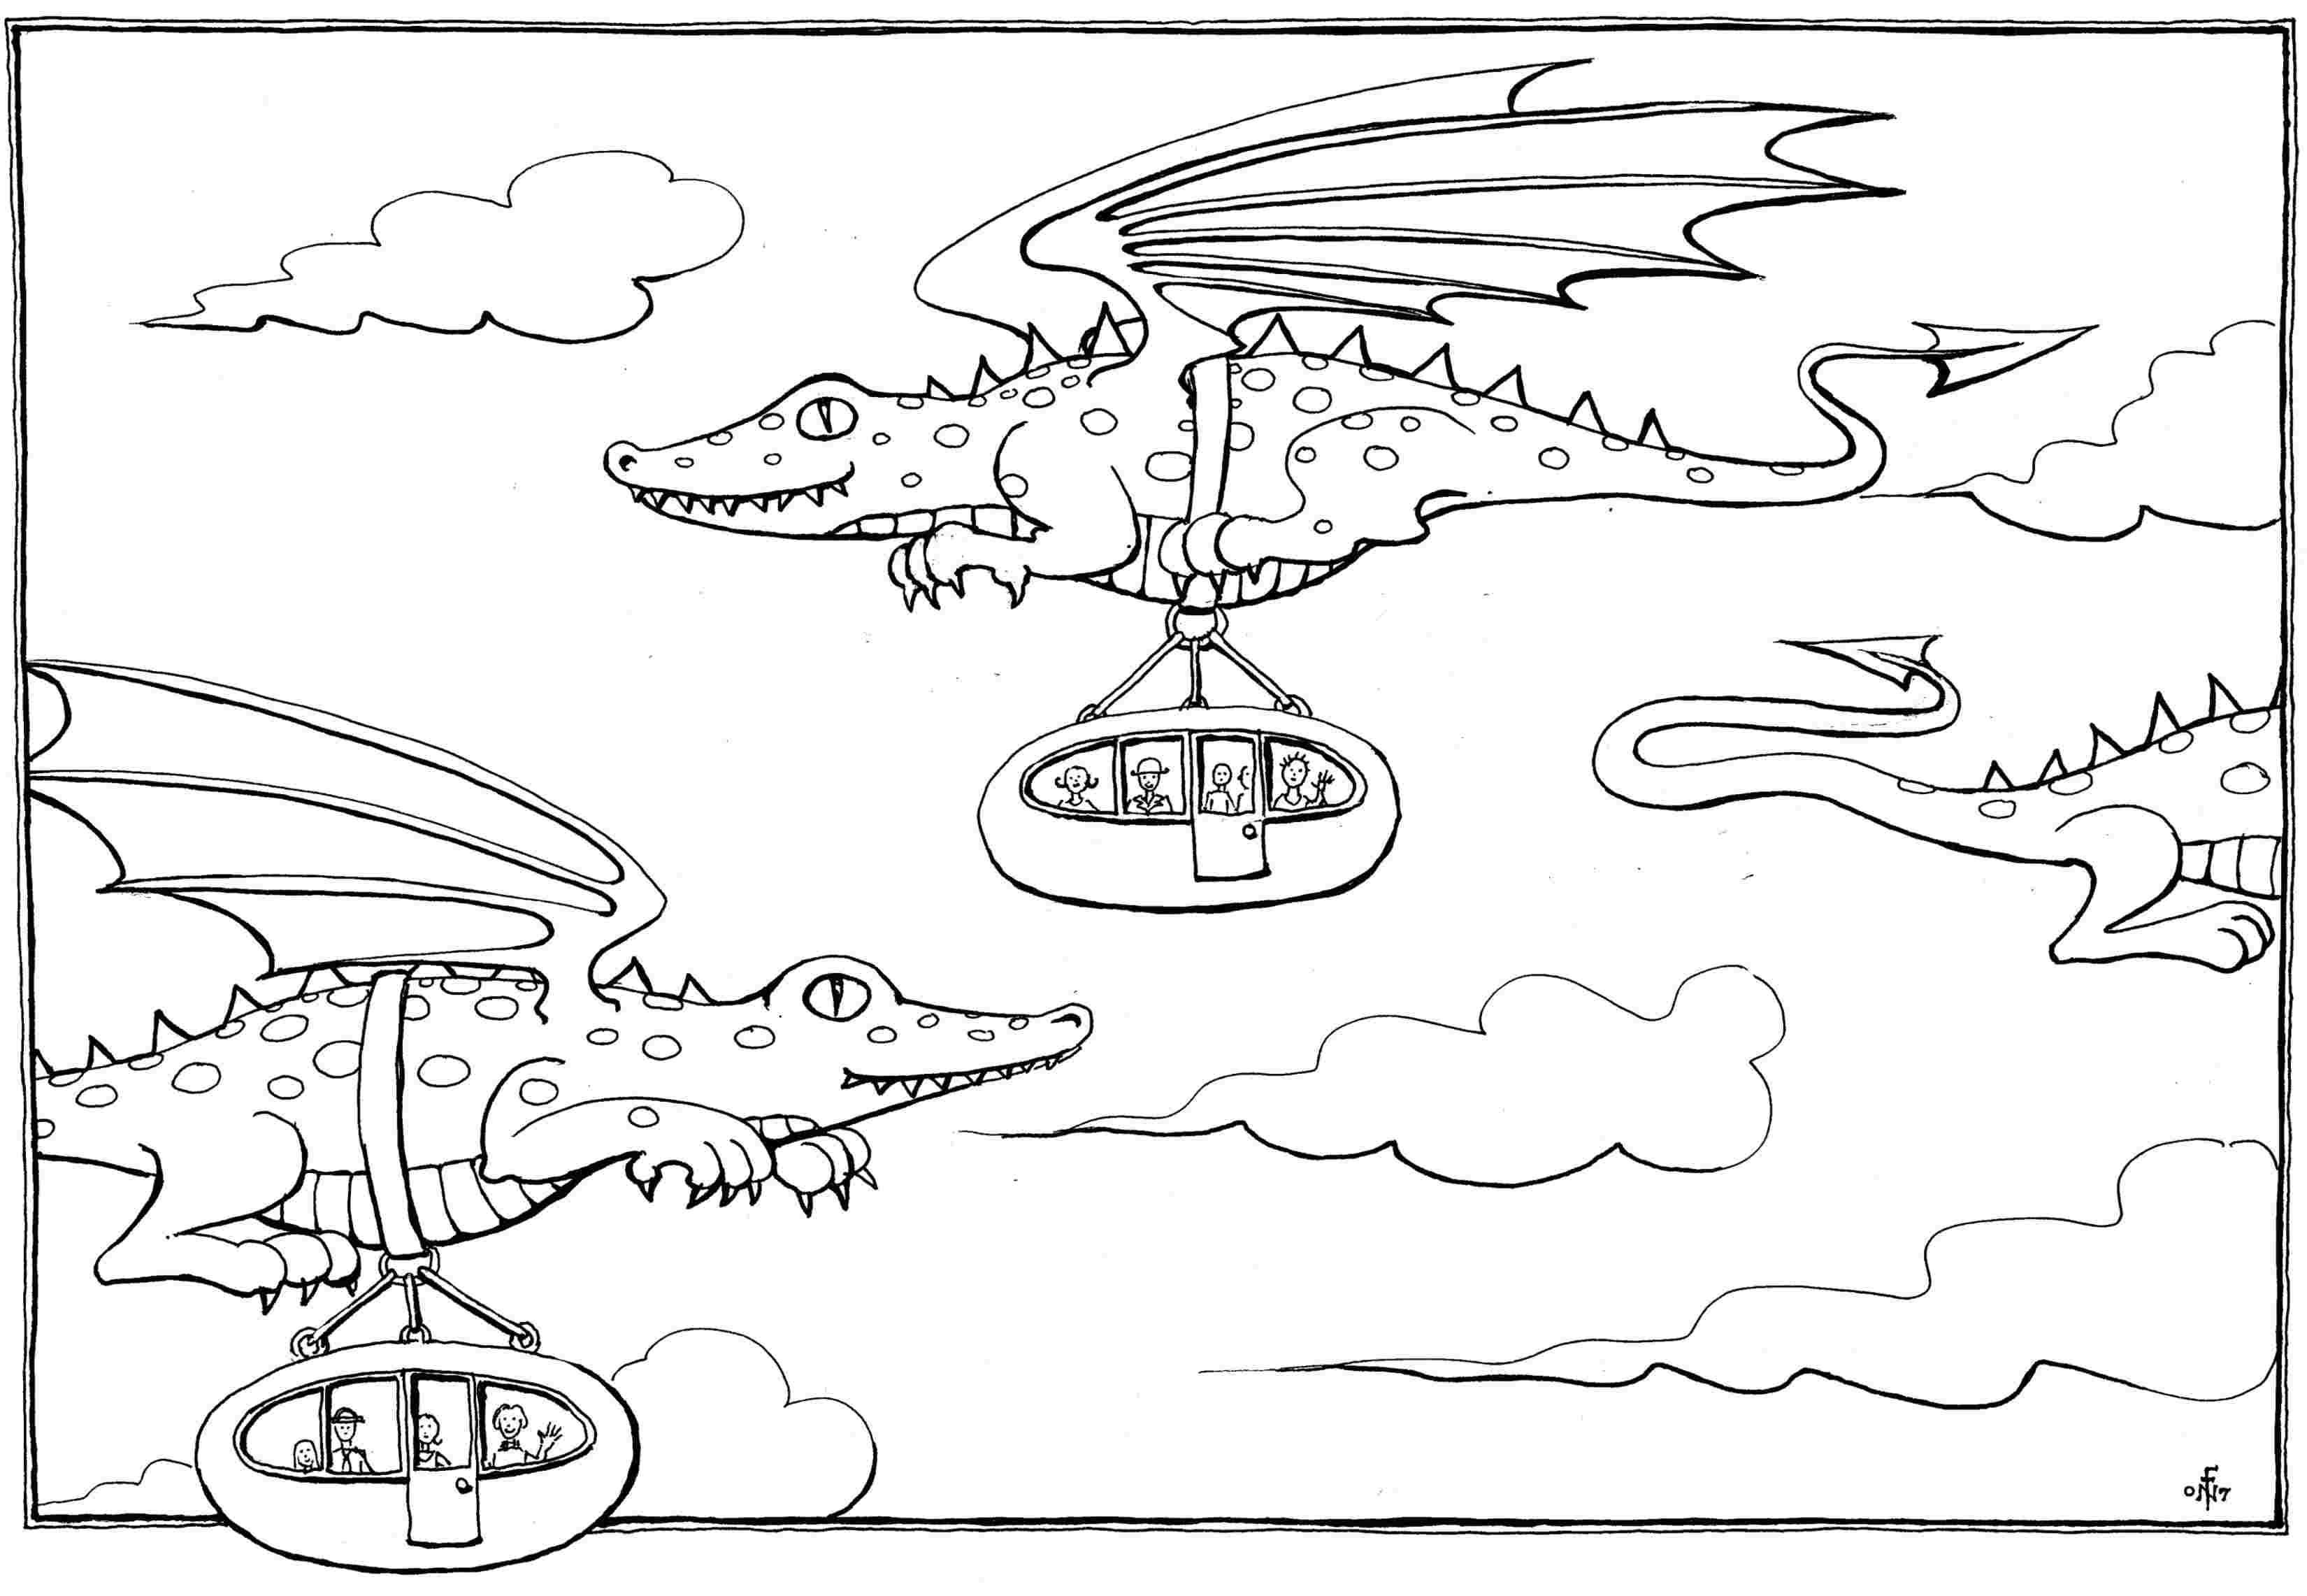 Dragon Bus - colouring-in drawing - to download, right click and save, print out and colour in!